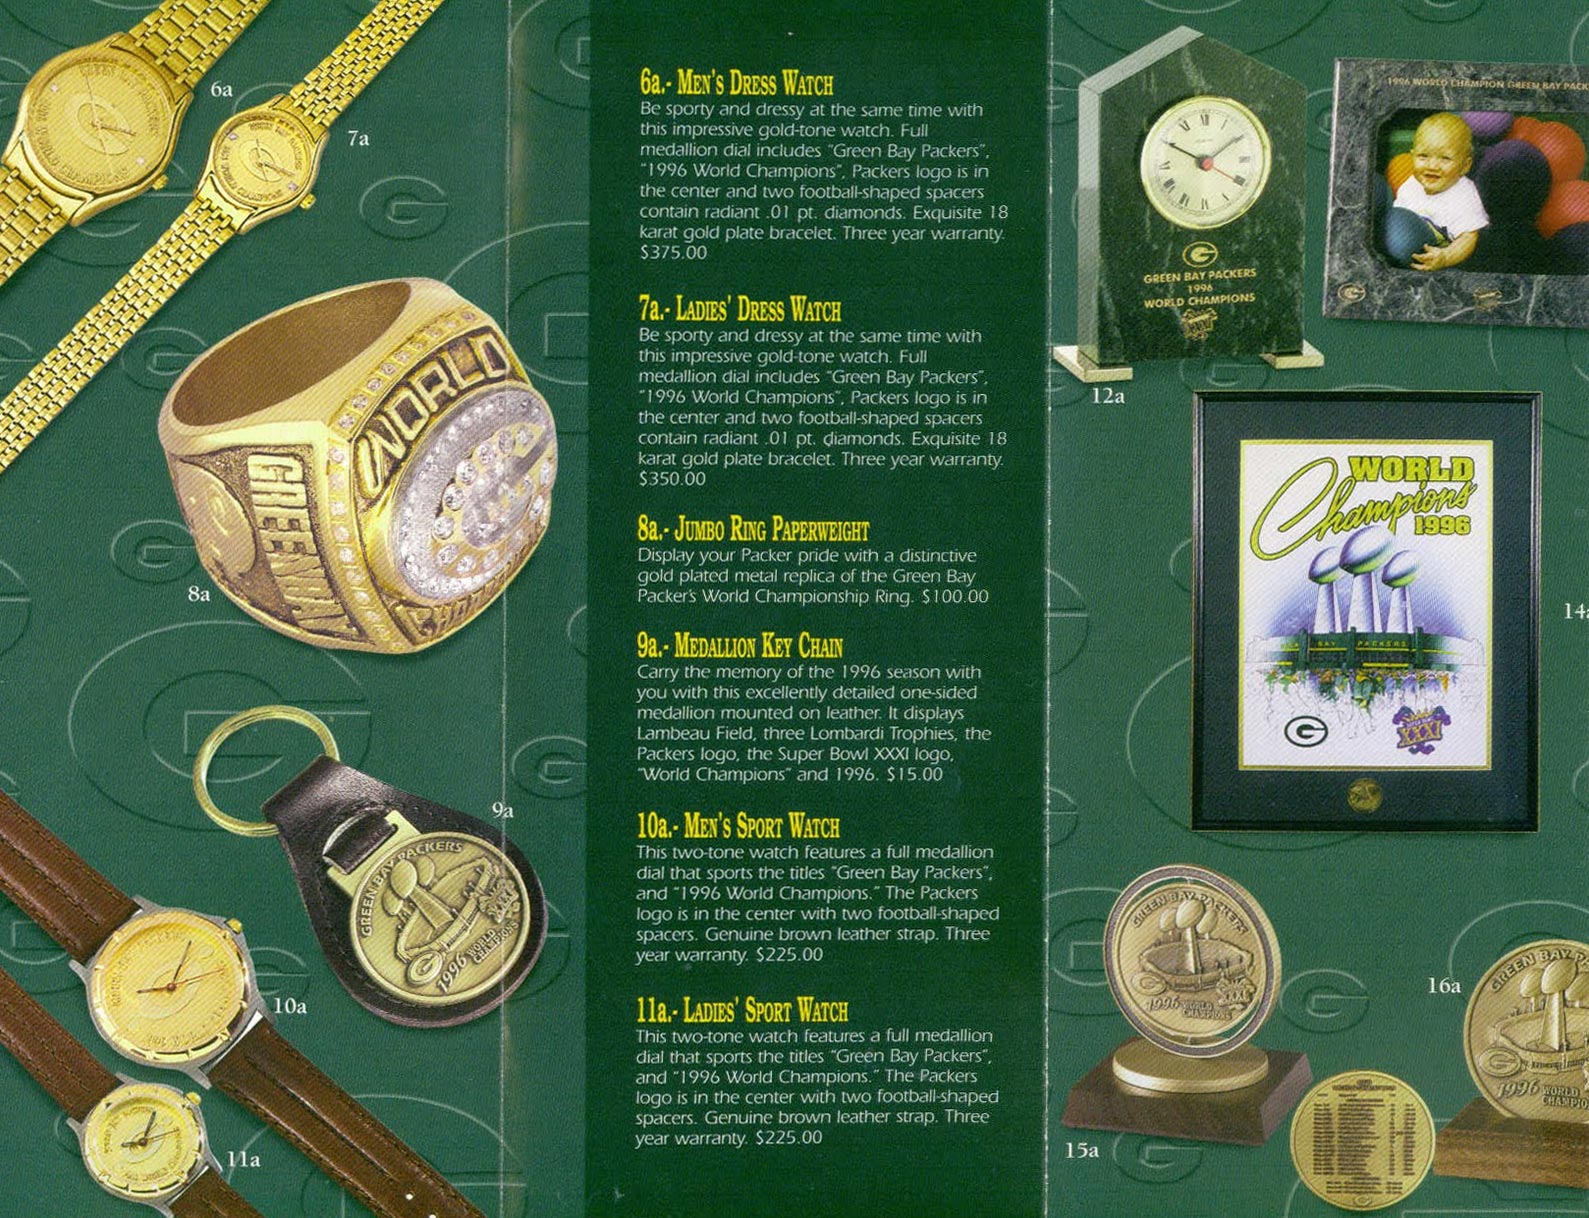 The Wearing Of the Green (and Gold) 1996 Shareholder Rings